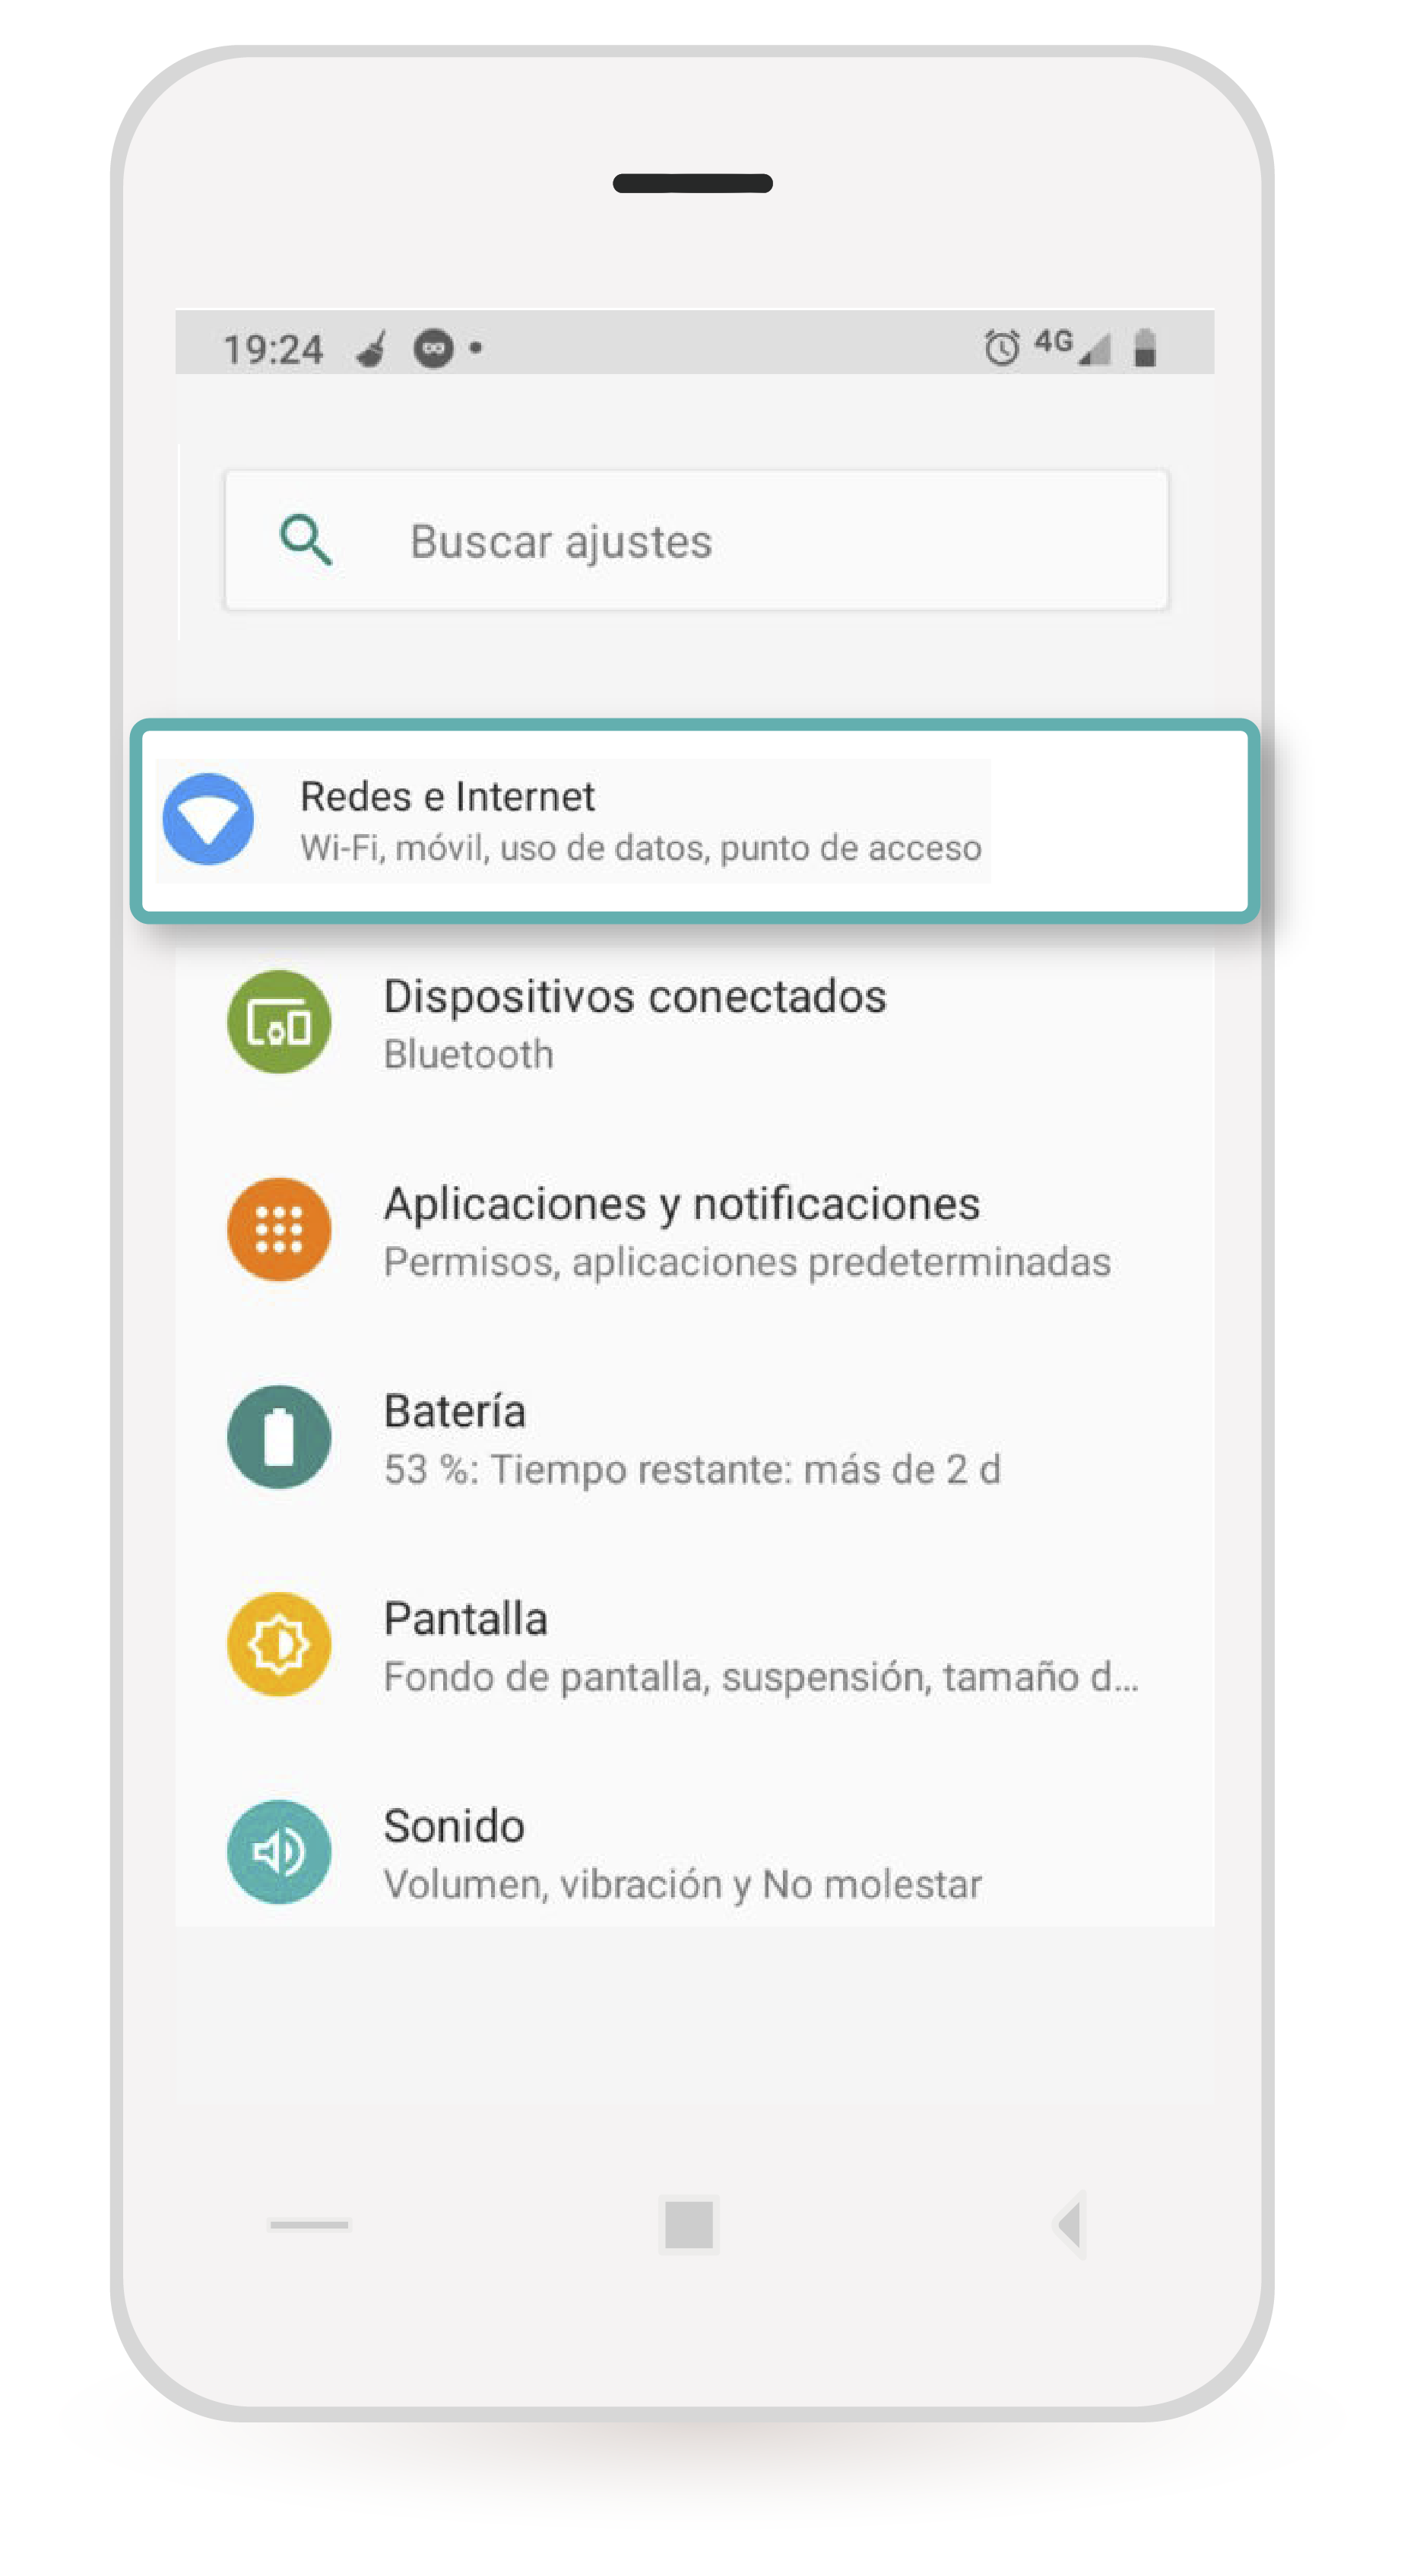 aw-Roaming-nacional-internet-y-redes-Android.png